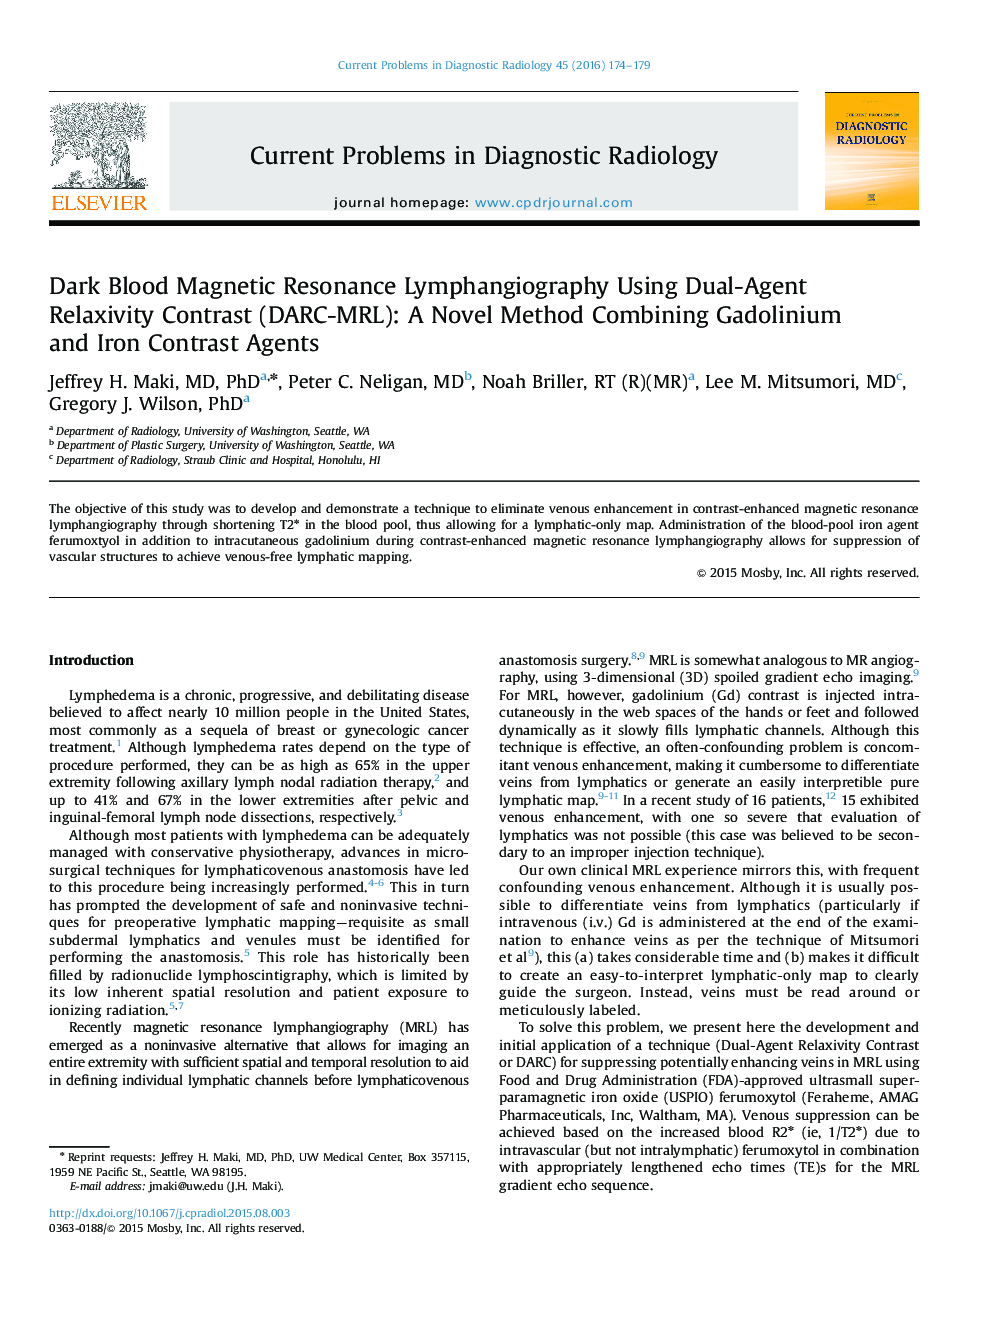 Dark Blood Magnetic Resonance Lymphangiography Using Dual-Agent Relaxivity Contrast (DARC-MRL): A Novel Method Combining Gadolinium and Iron Contrast Agents